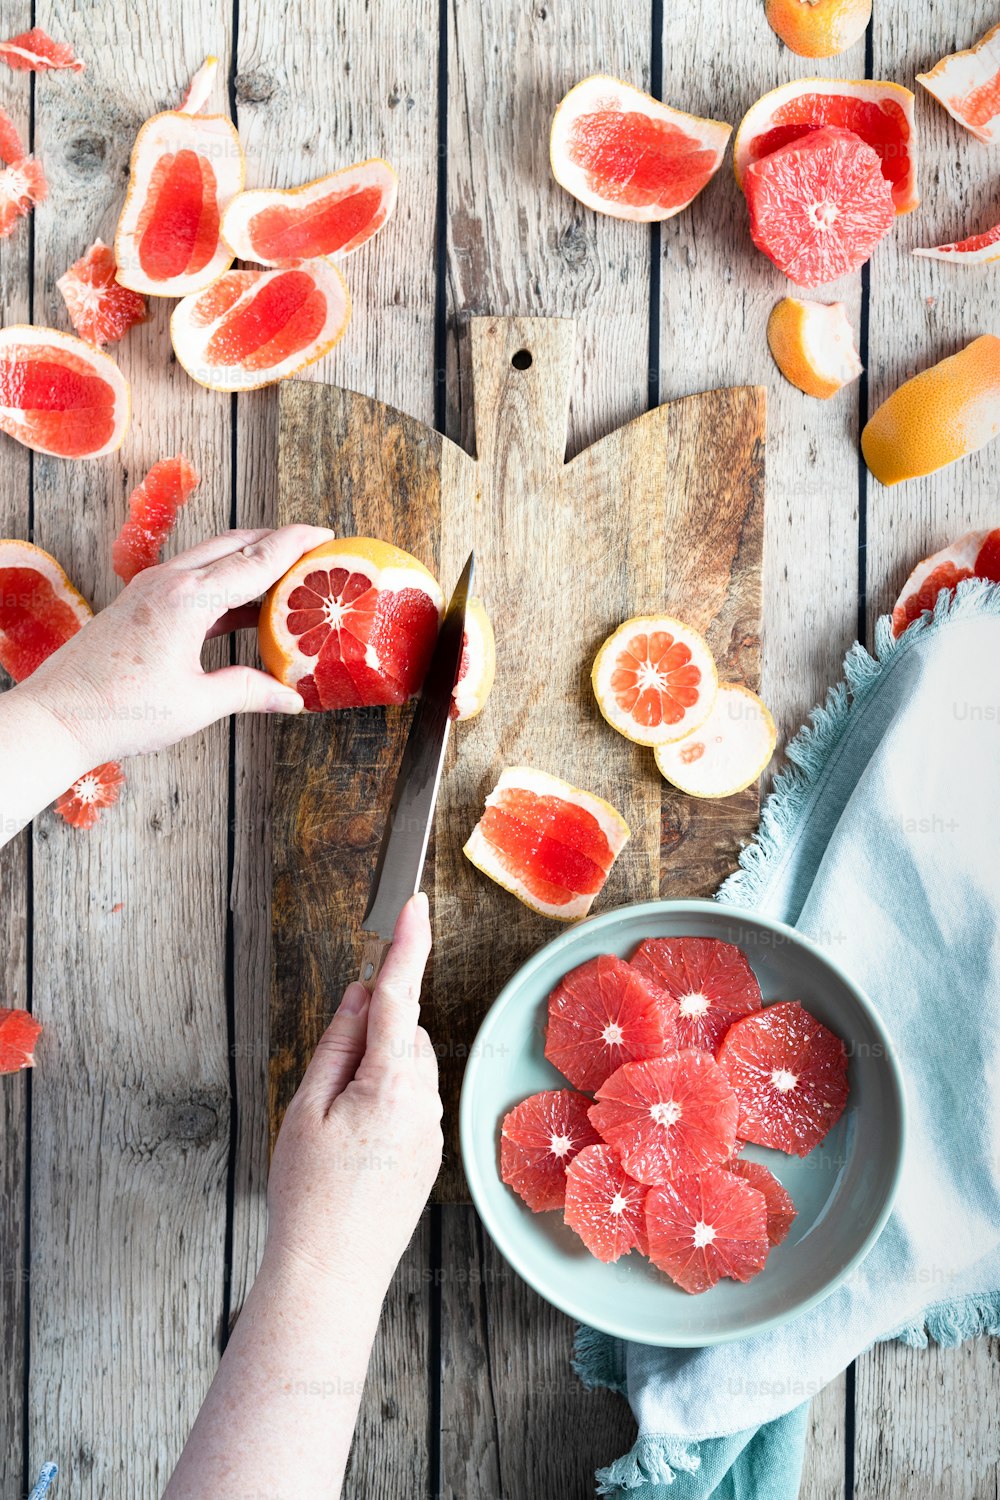 a person cutting up a grapefruit on a cutting board